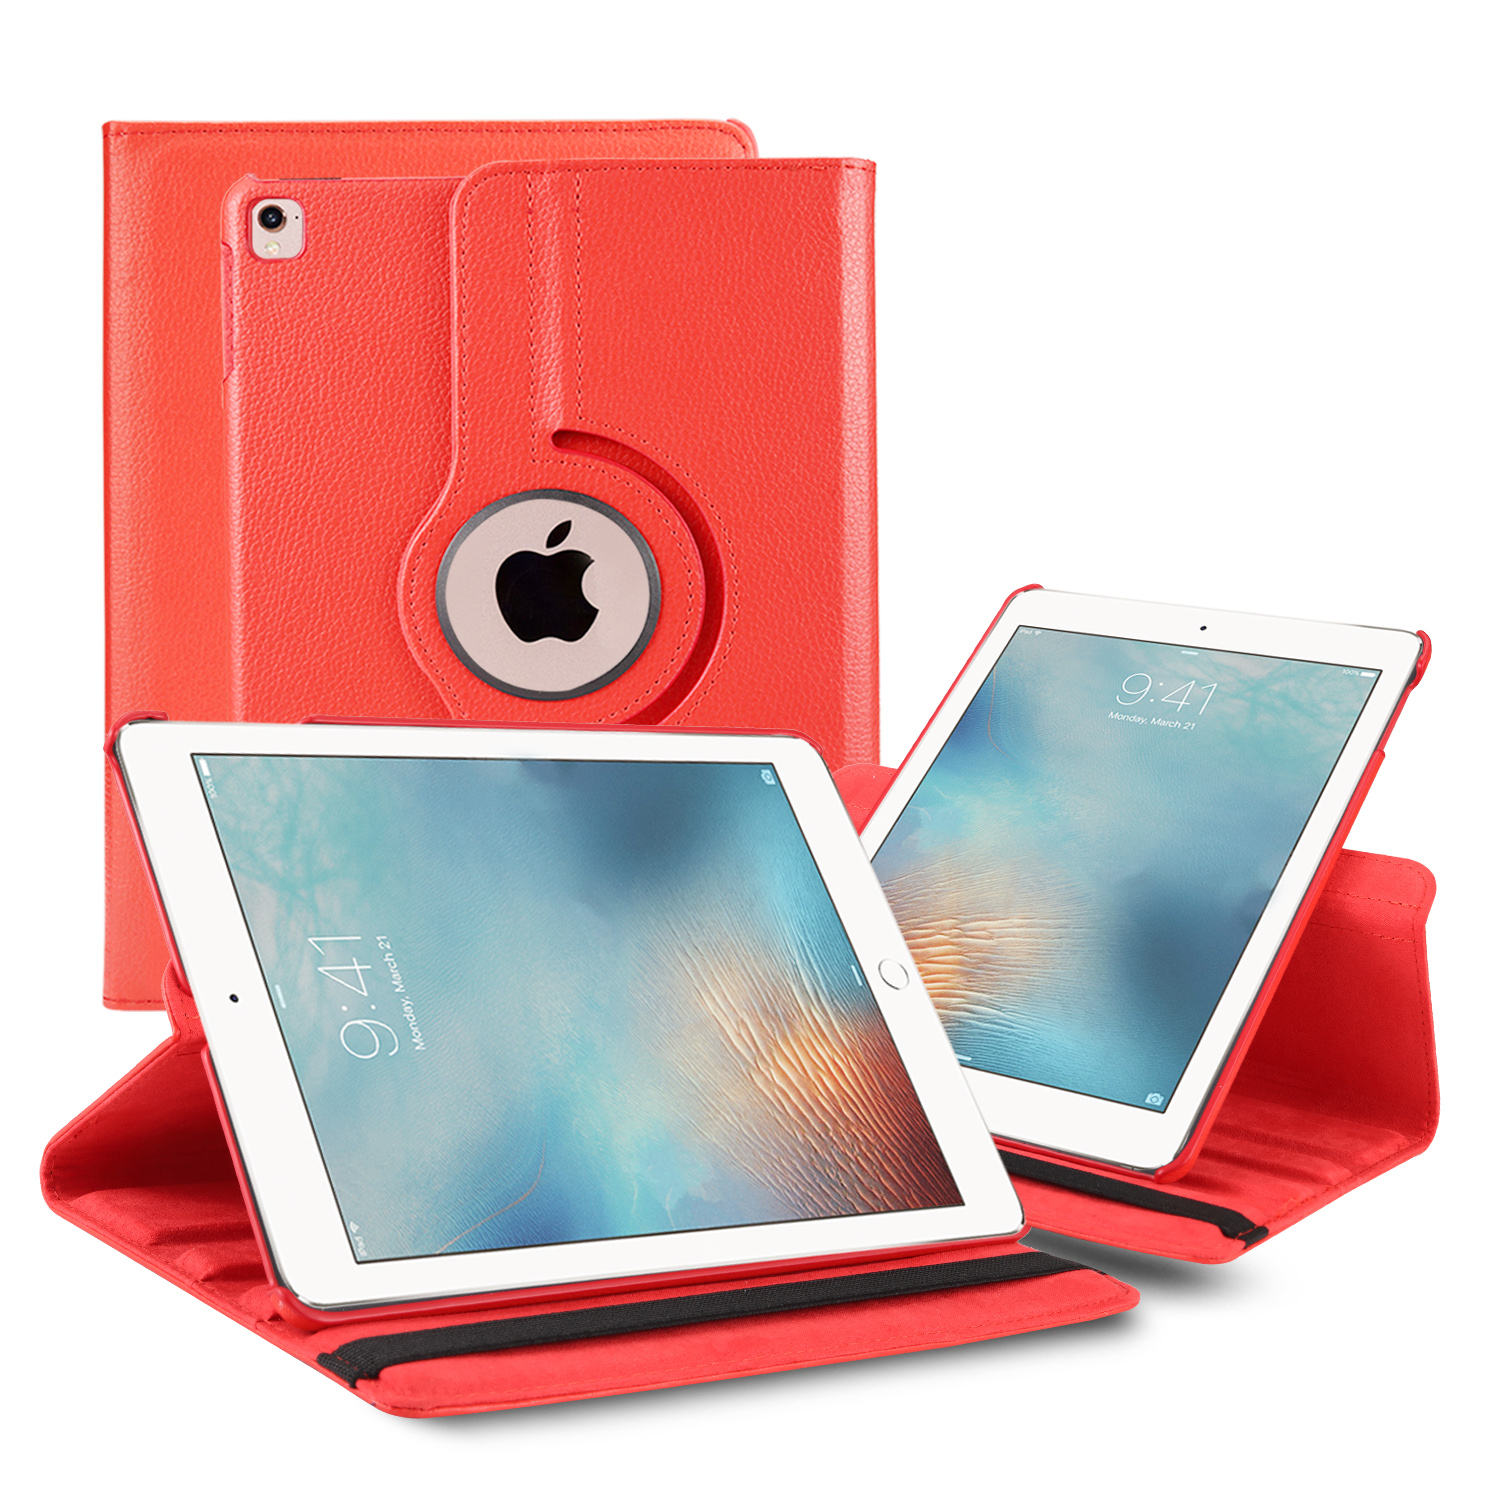 Leather-Cover-Stand-Case-With-Stylus-Pen-Slot for iPad 10.2 (Red)